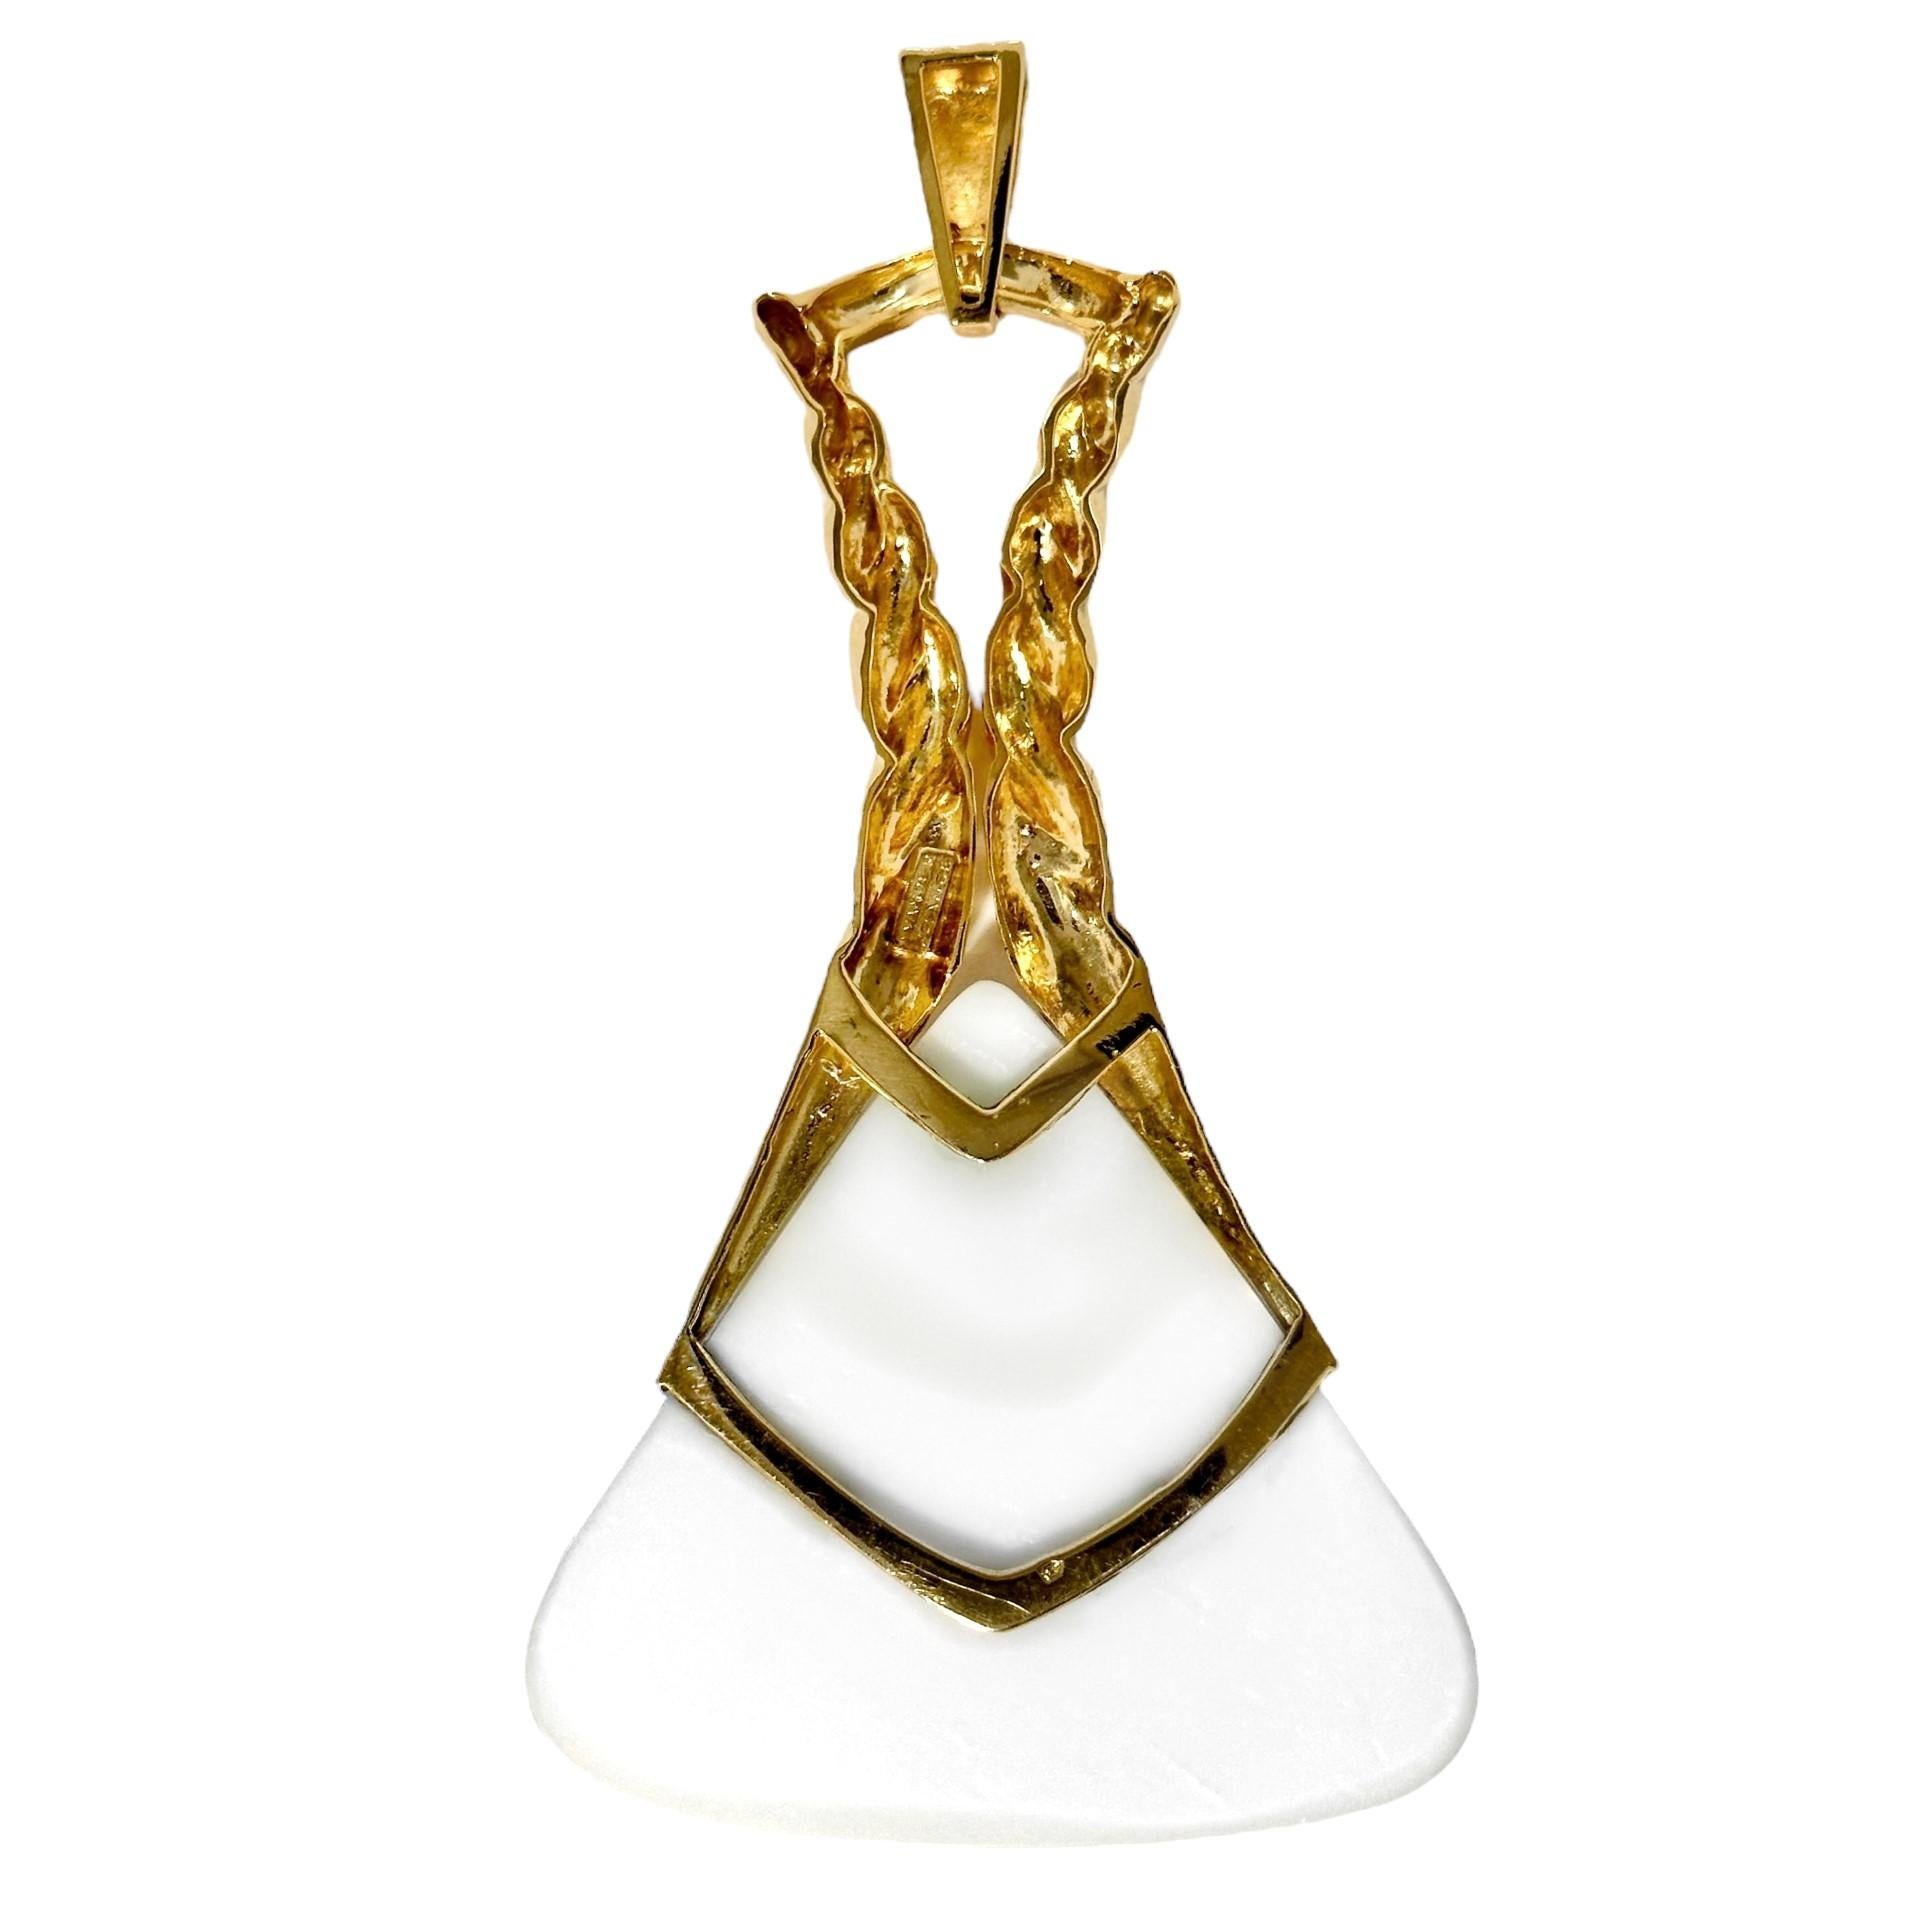 Cabochon Large, French, Hammered Gold and White Onyx Pendant 4 3/8 Inches Long by Wander For Sale